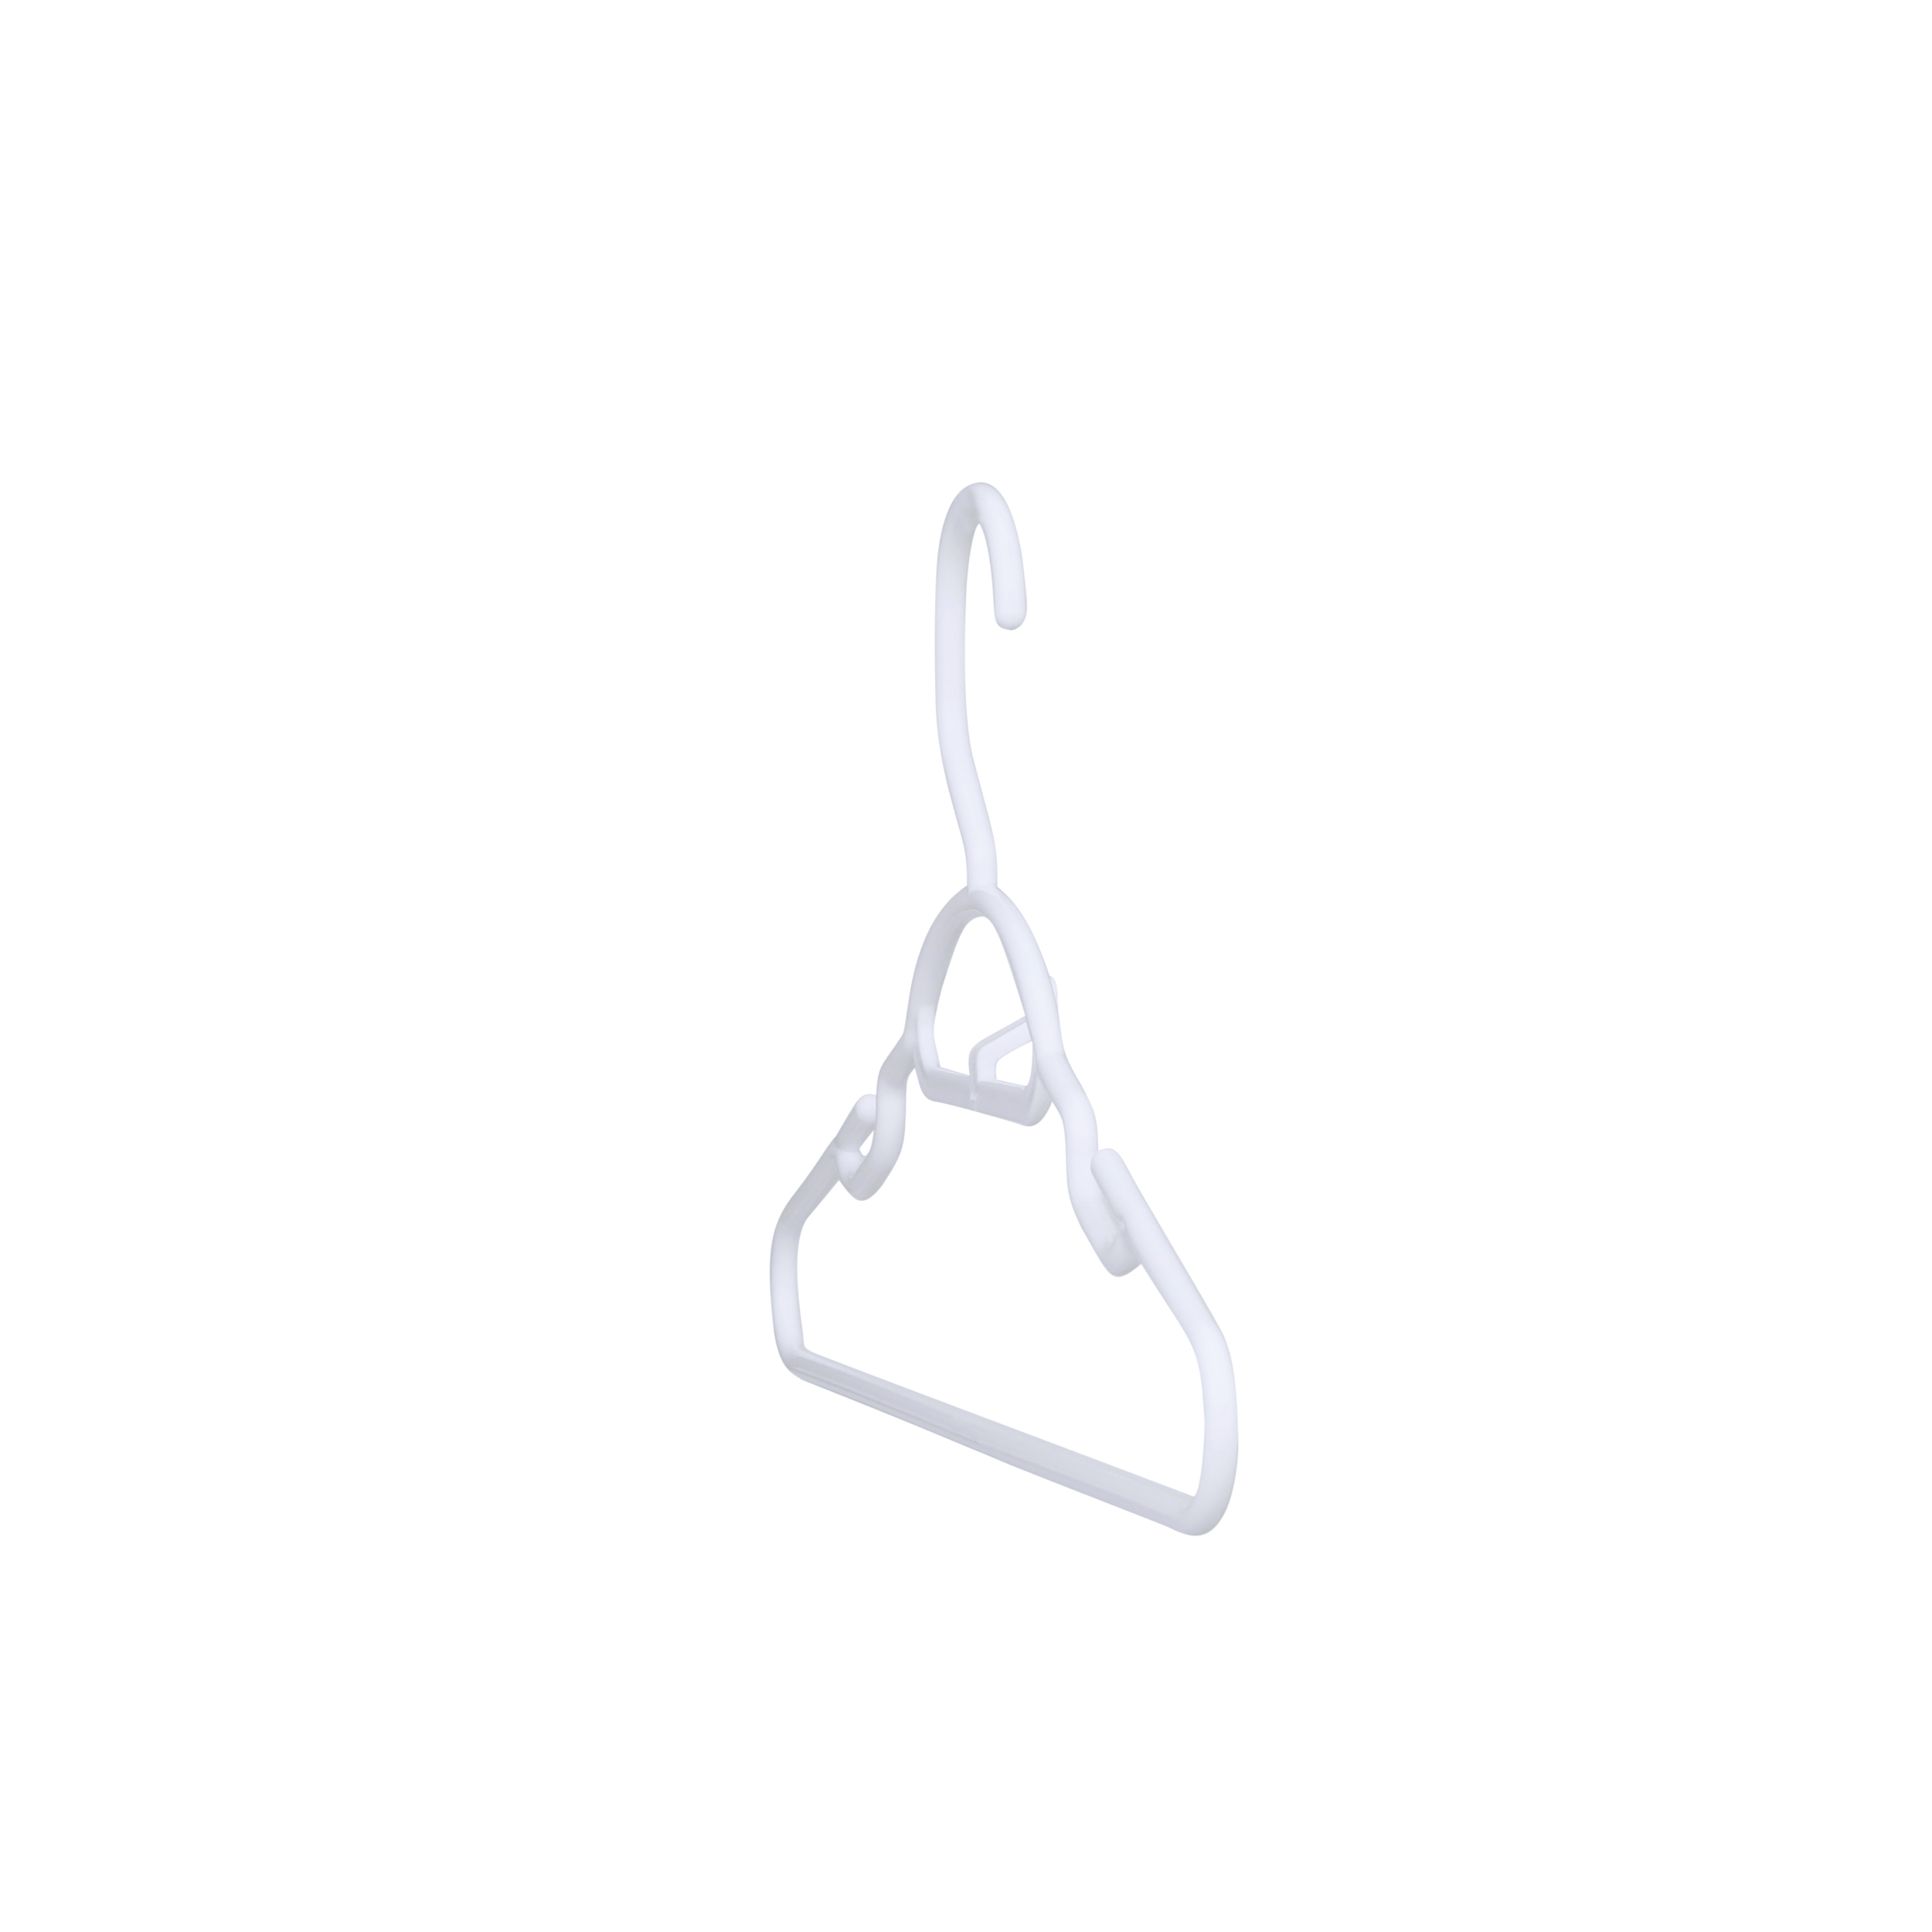 30 Pk Youth Petite Plastic Hangers for Children Clothes Sizes 8 to 14,  Petite, Teen, Preteen, Junior, 30 Pack (White)